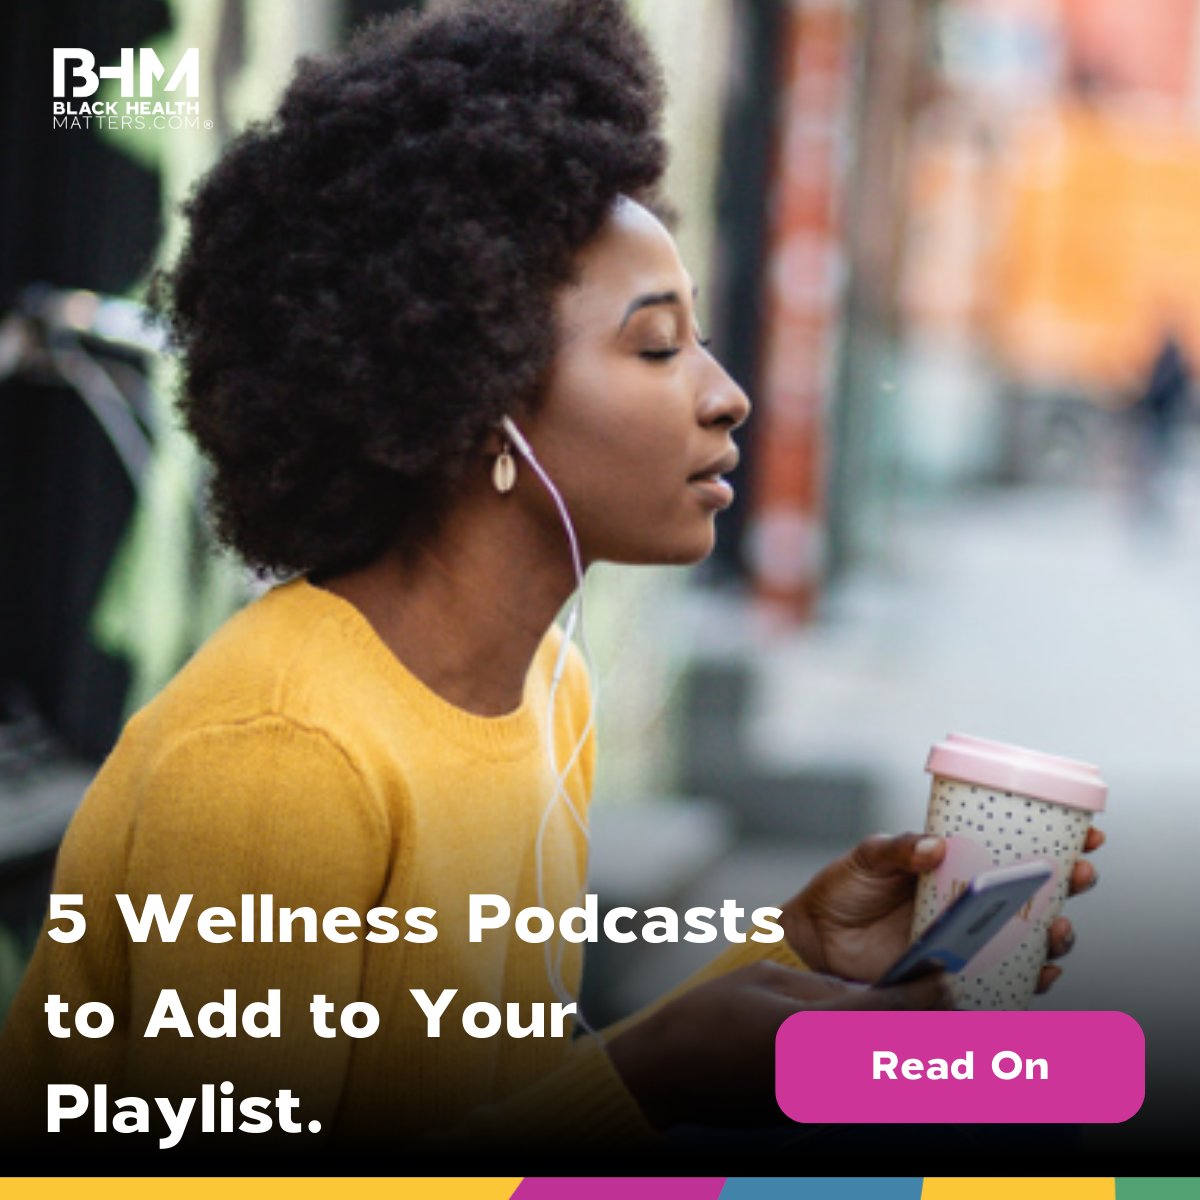 Elevate your wellness game with these 5 fantastic podcasts curated by us! From nutrition tips to mental health discussions, there's something for everyone. Dive in and discover your new favorite show: bit.ly/3PVPkCh #BlackHealthMatters